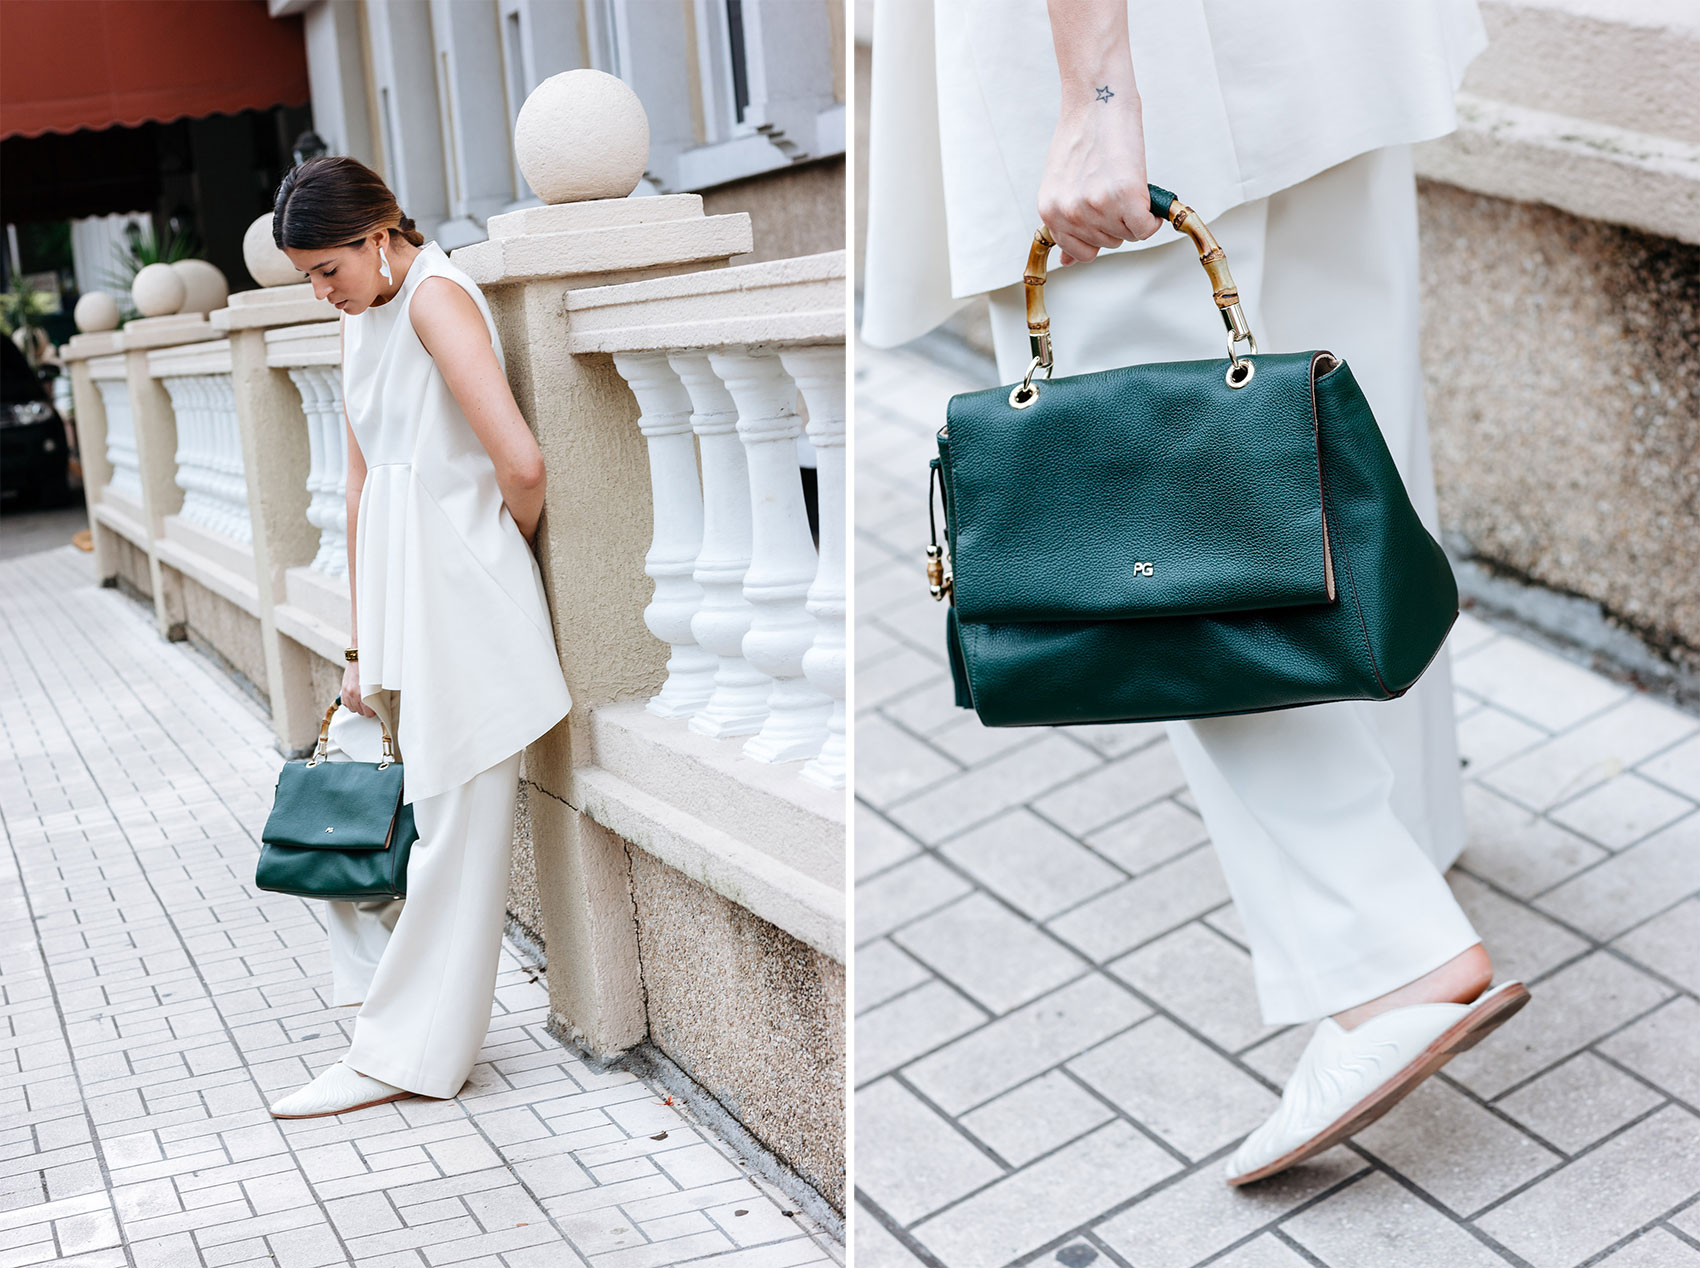 Maristella wears a white top, pants and bag from Purificacion Garcia, white mules from Dolce Vita